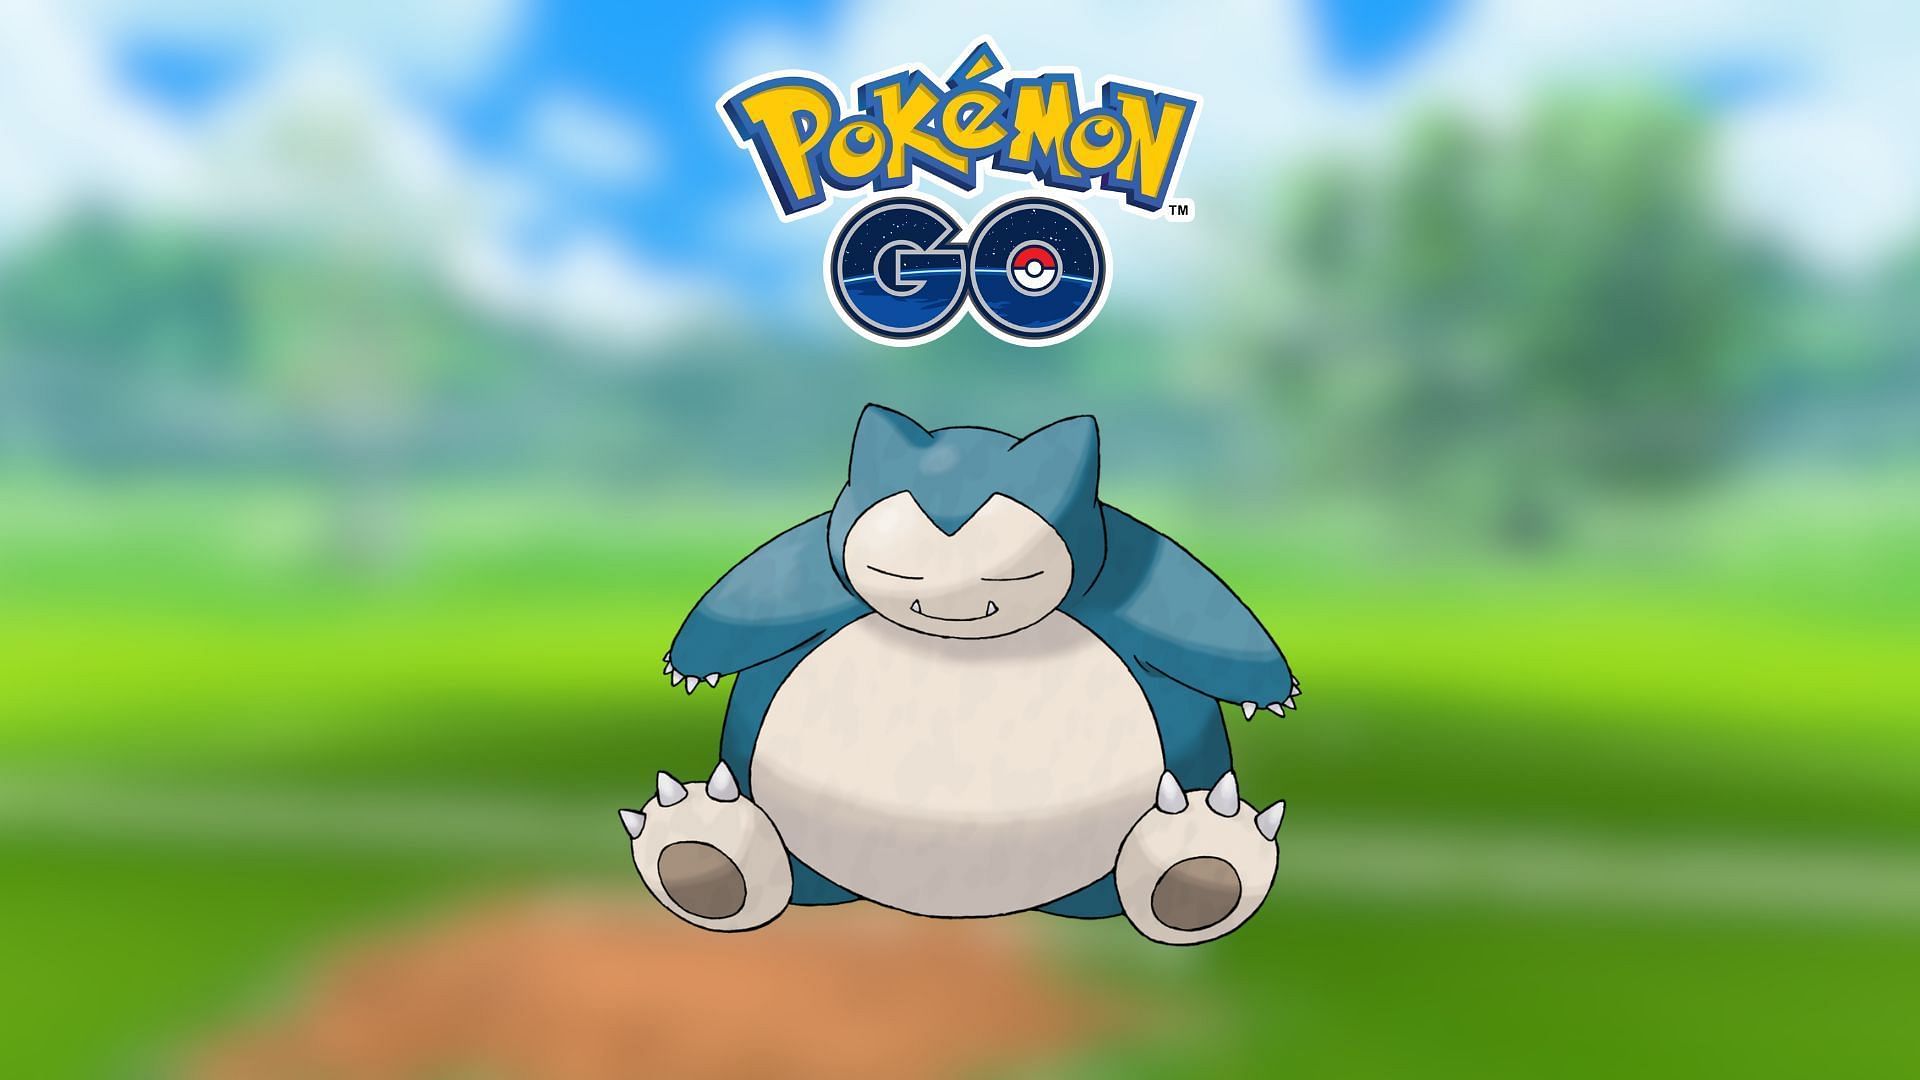 How to solo defeat Snorlax in Pokemon GO